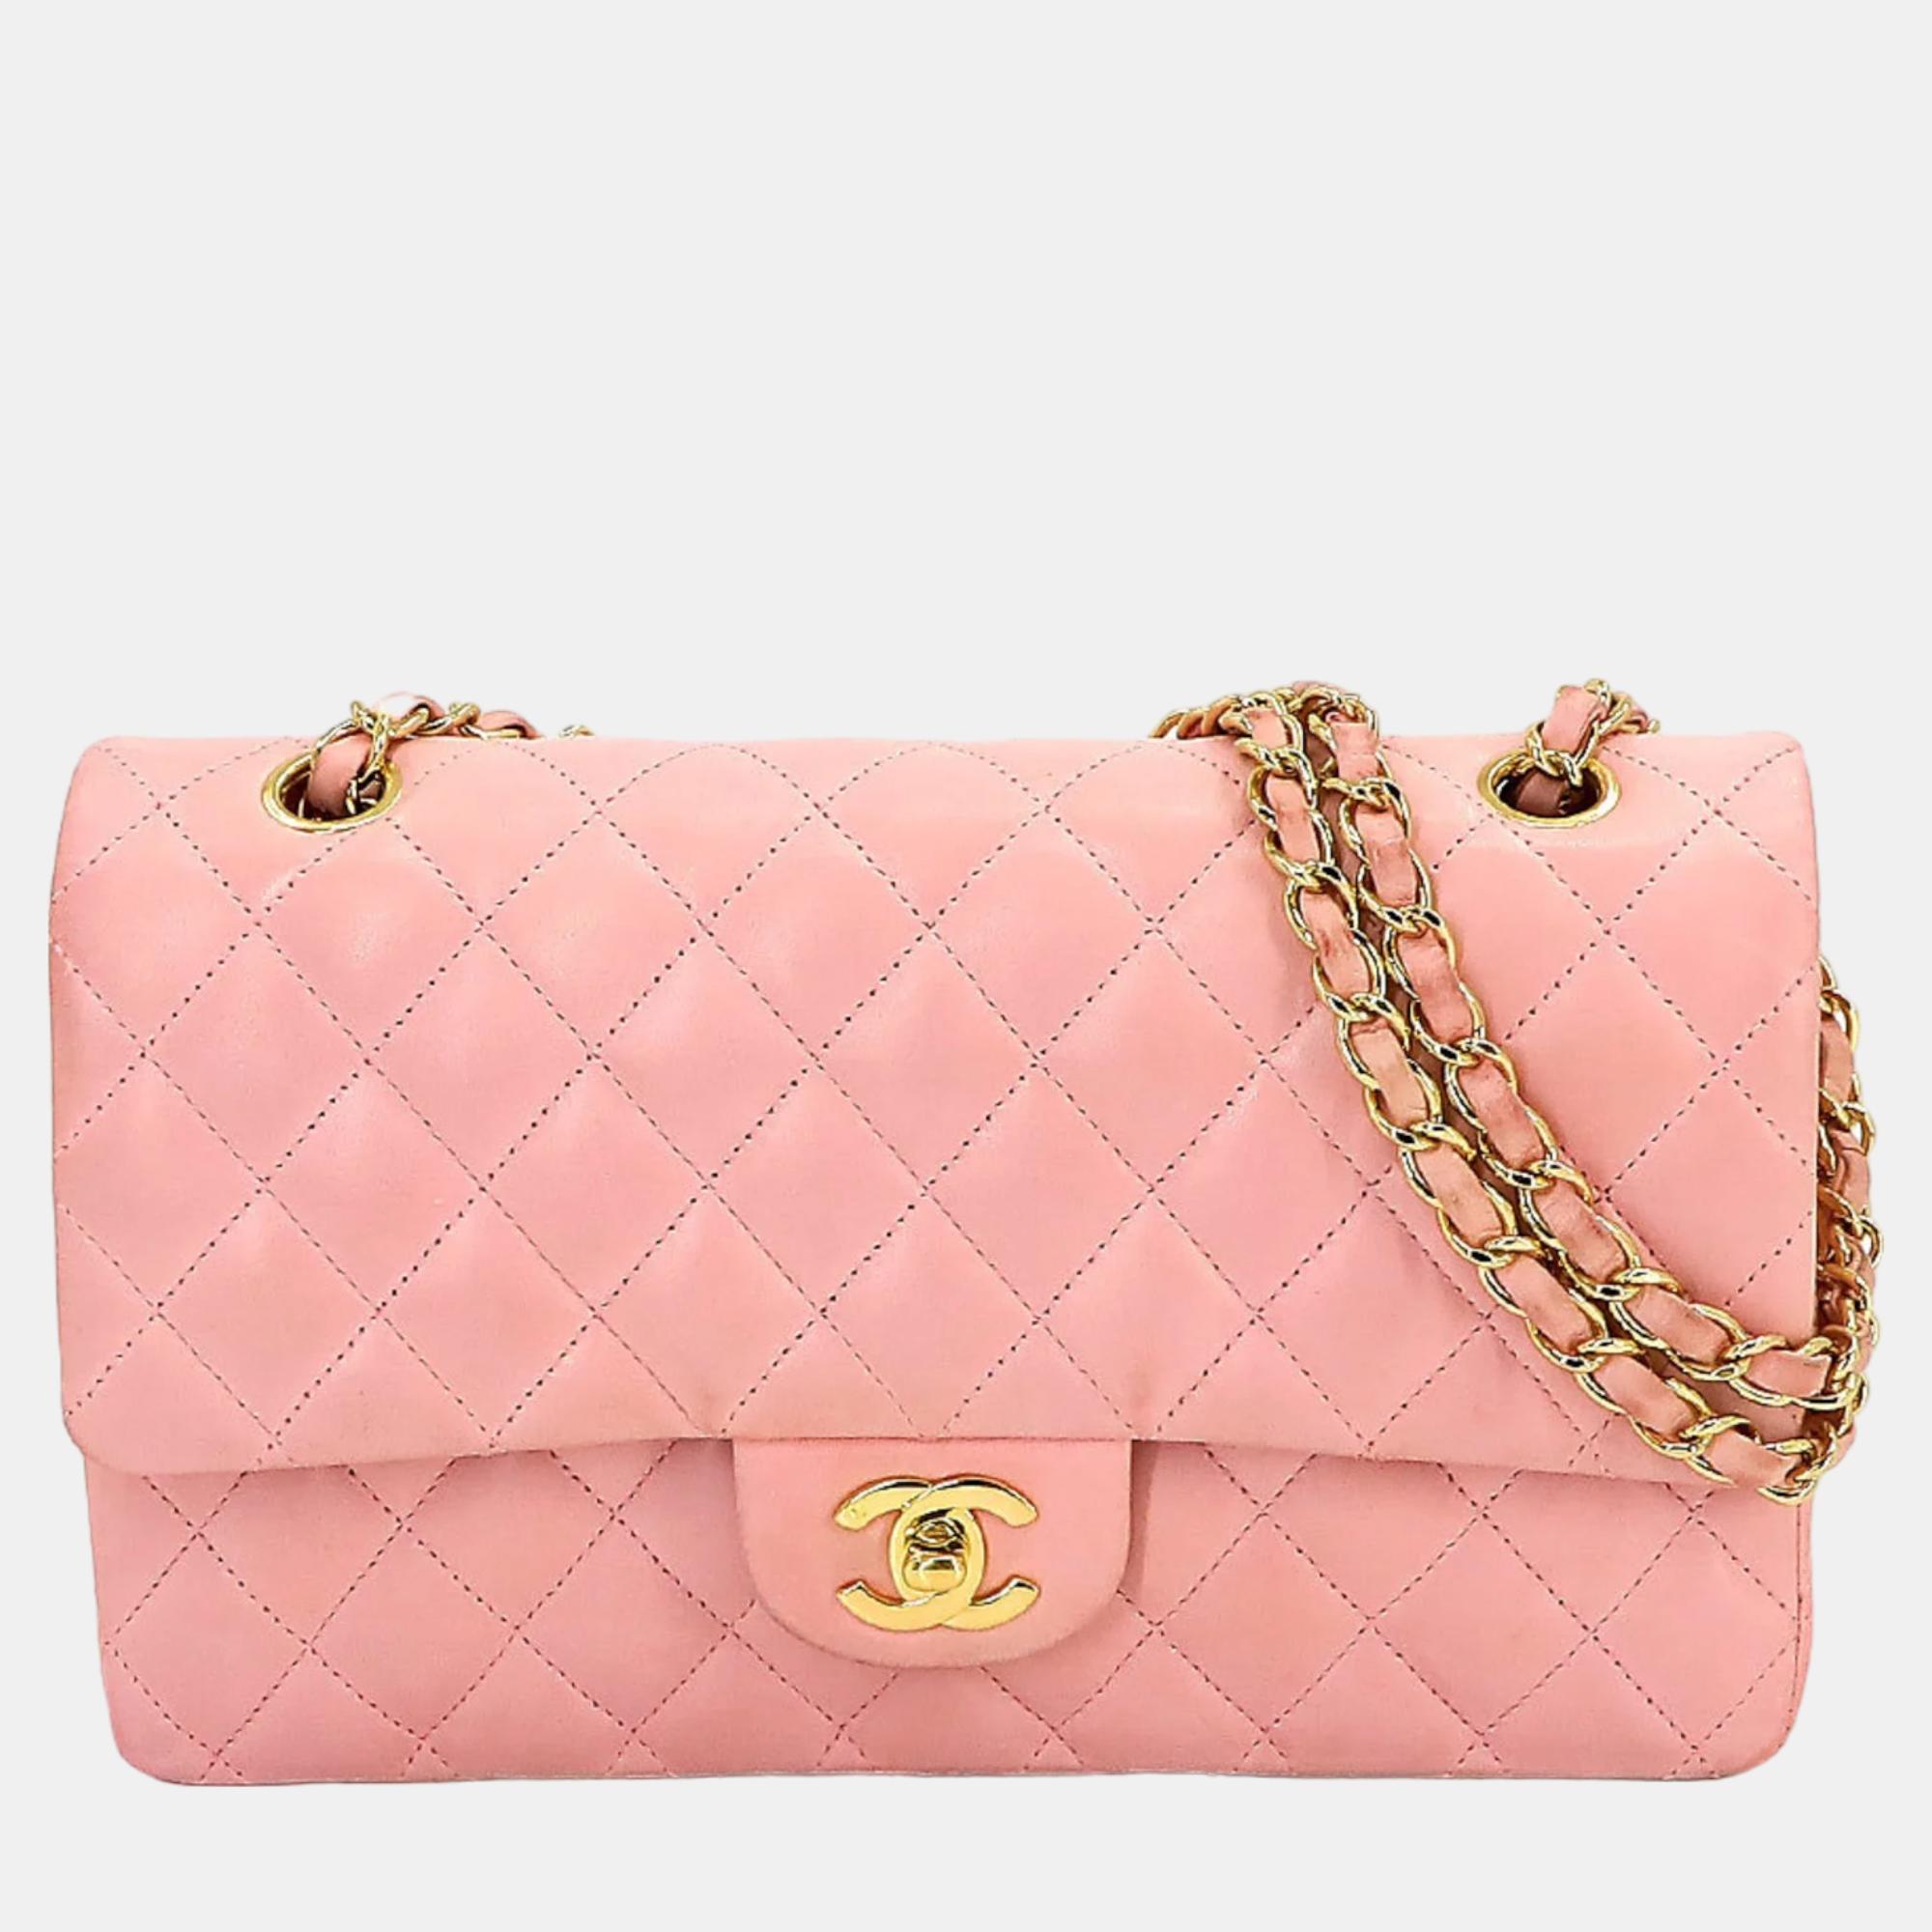 Chanel pink lambskin leather medium classic double flap shoulder bag